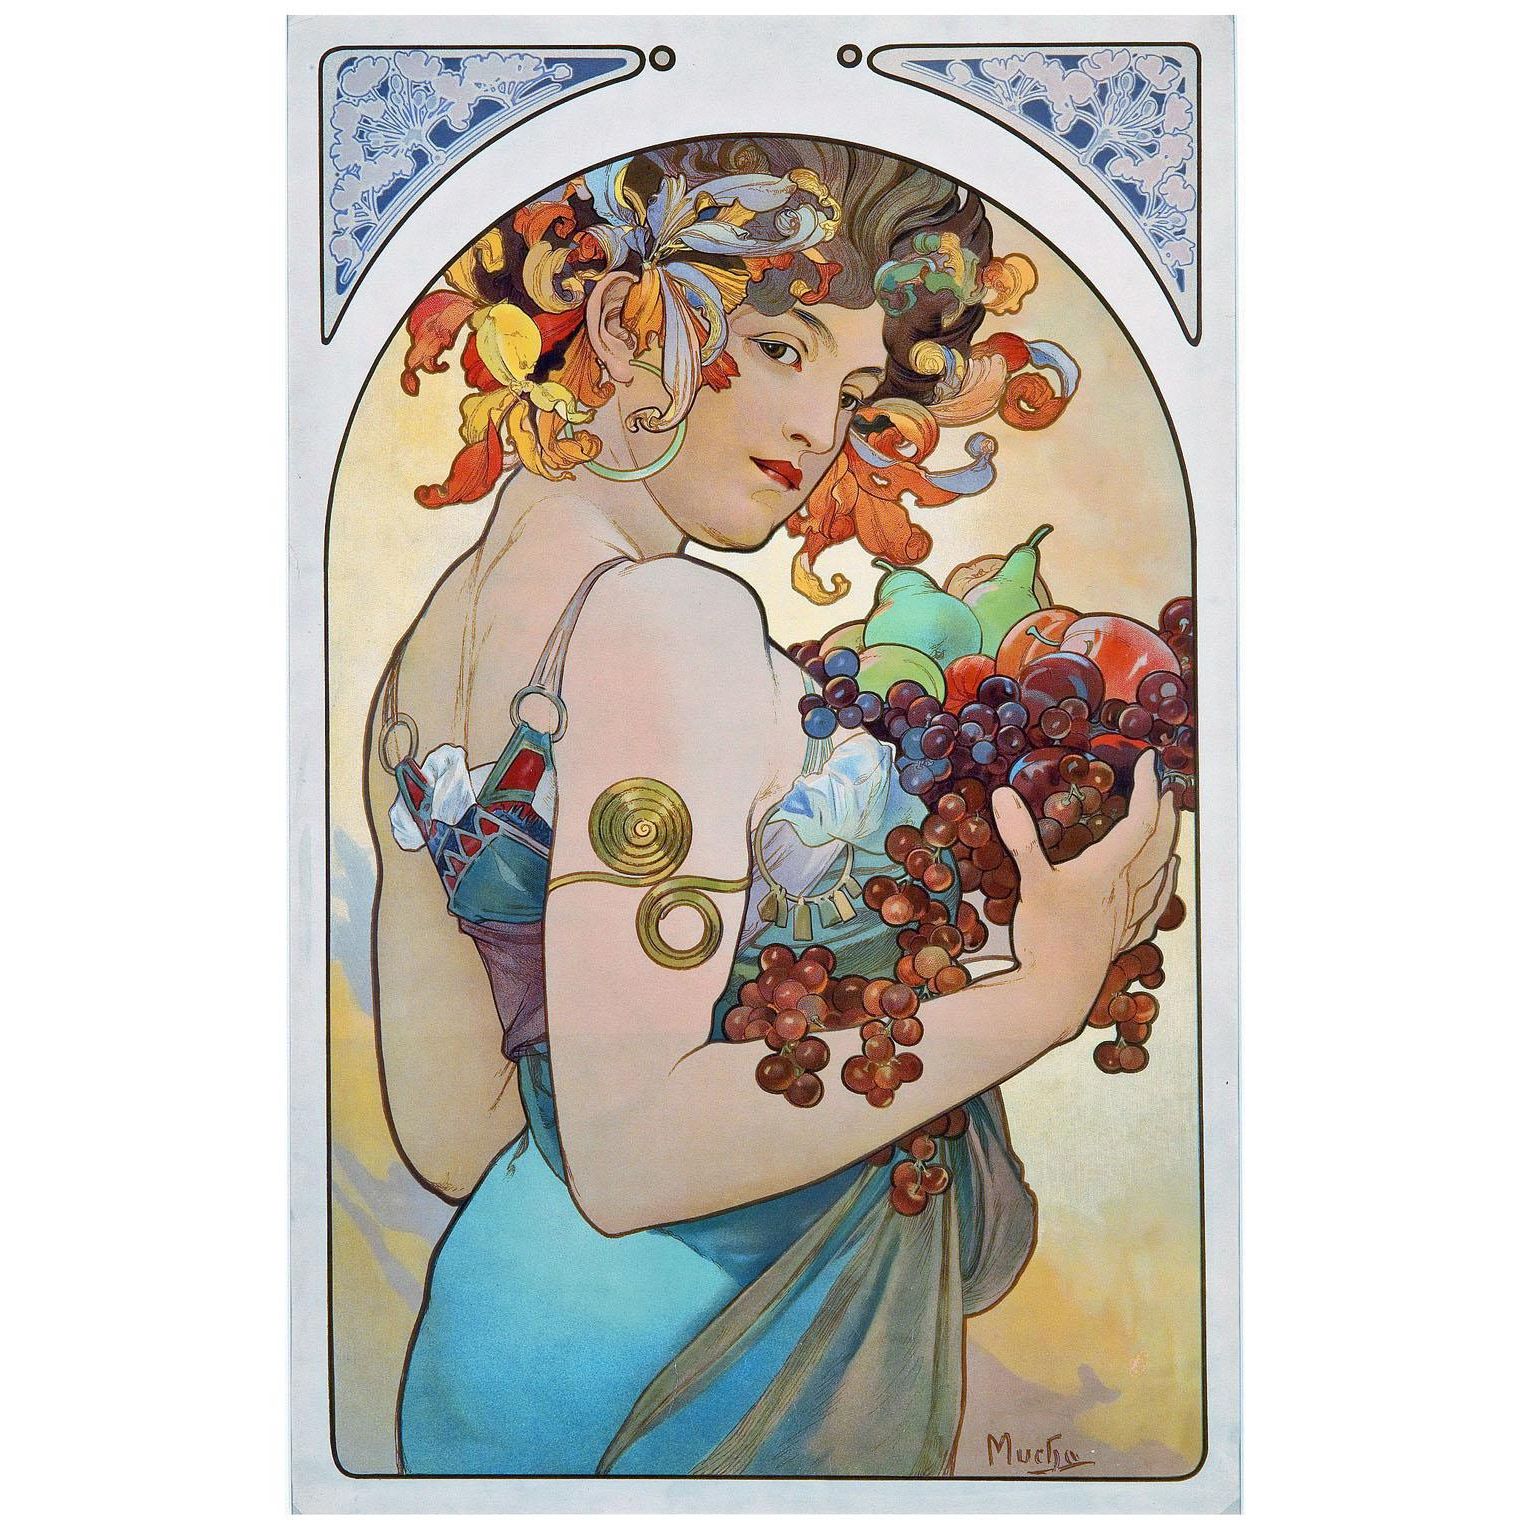 Alfons Mucha. Fruit. 1897. Color lithograph